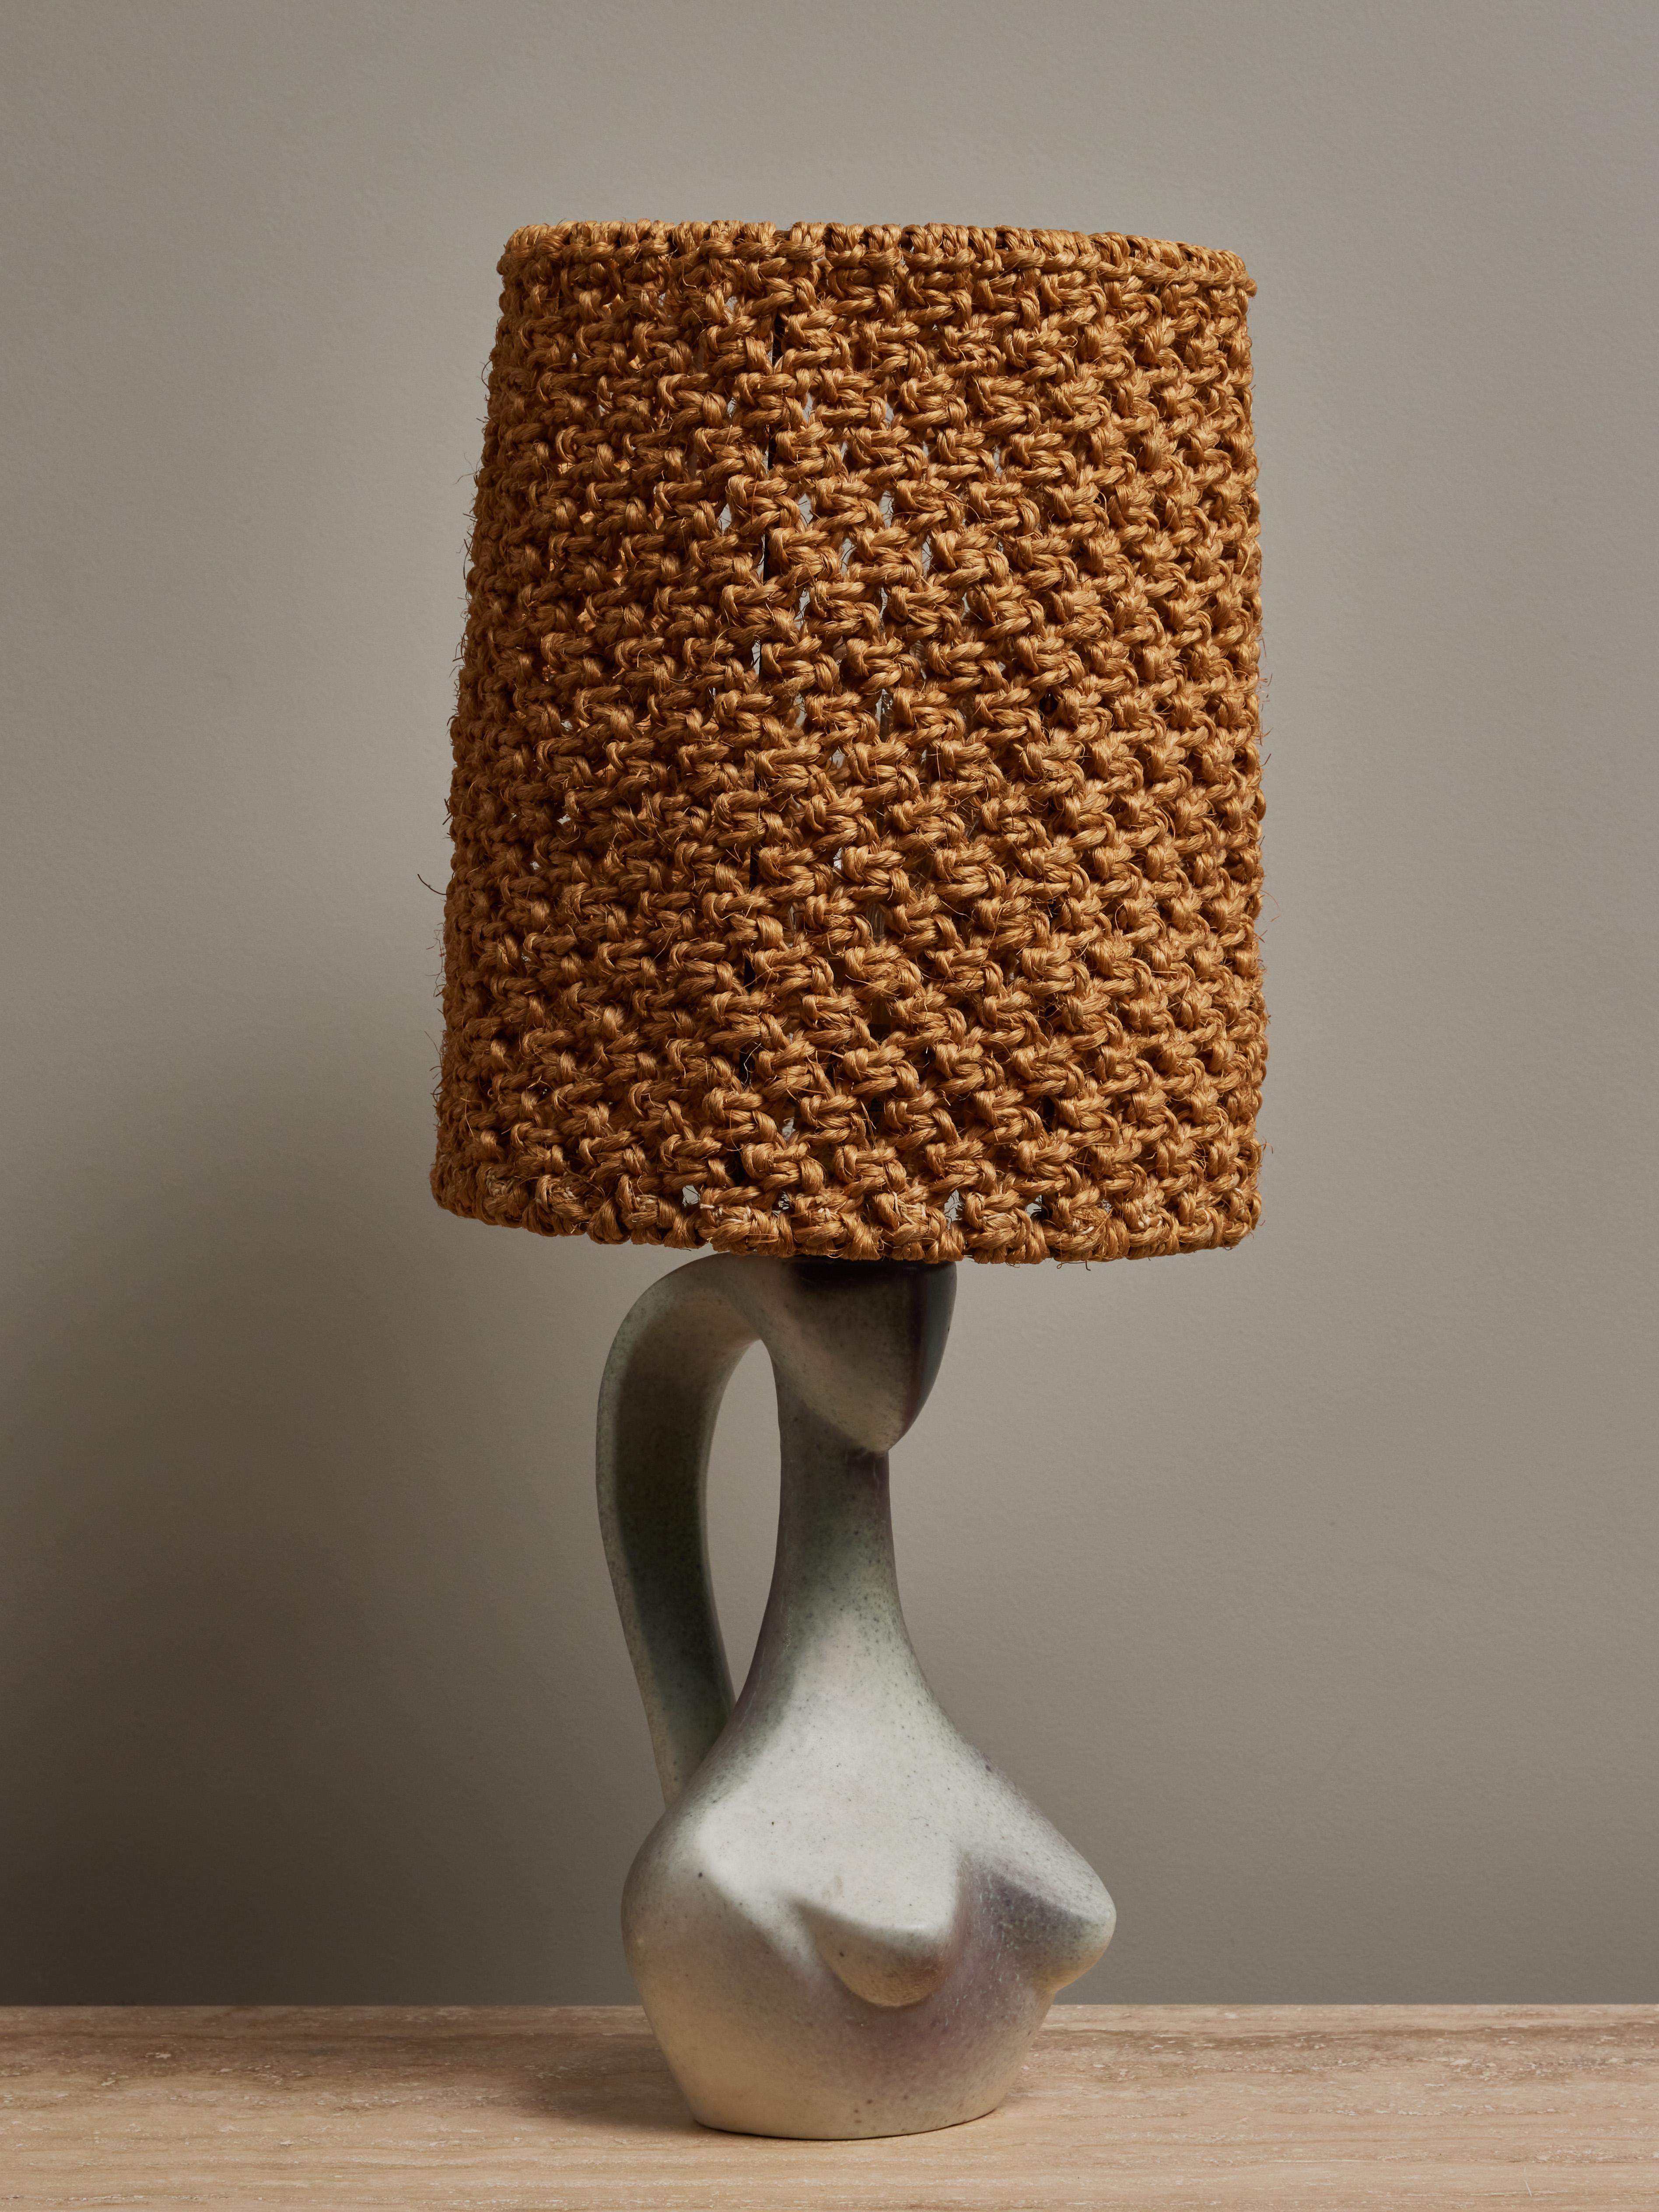 Beautiful ceramic table lamp signed by Jacques Blin, shaped like a woman bust, and topped with a woven rope shade.

Jacques Blin (1920-1995) Jacques Blin is a well-known French ceramist who started as an aeronautical and automobile engineer. During